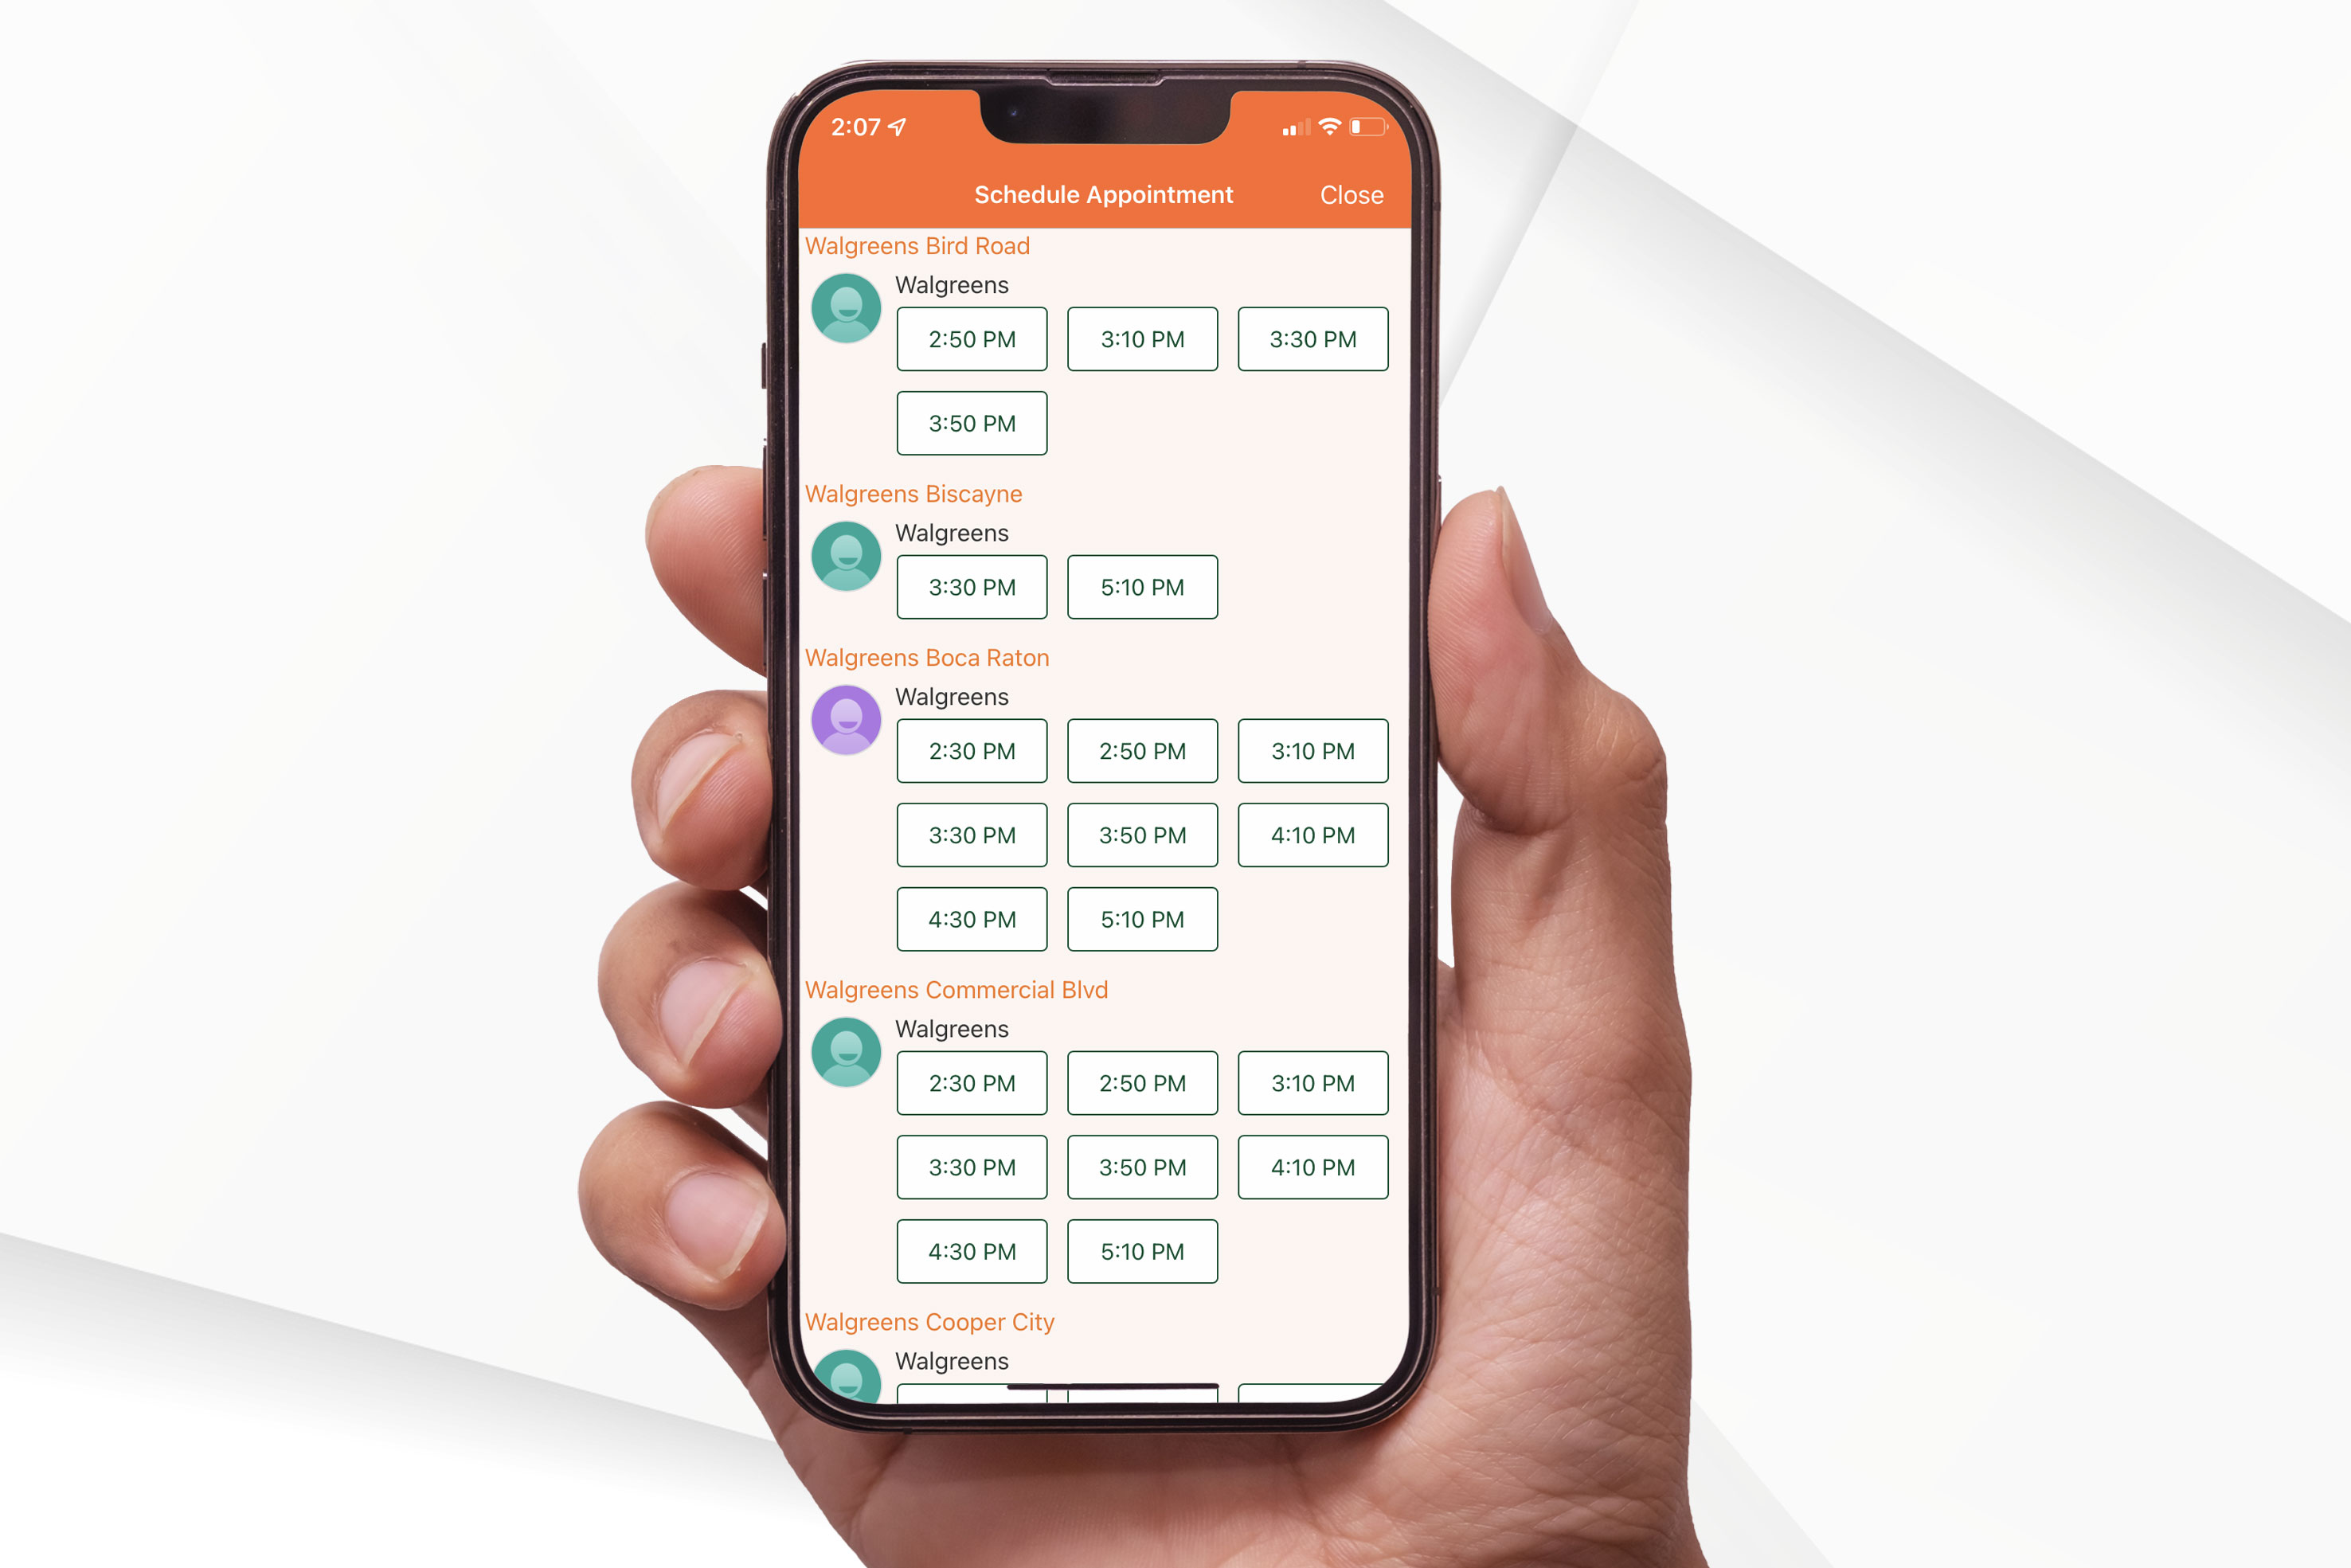 Hand holding an iPhone that shows a screen from the MyUHealthChart app